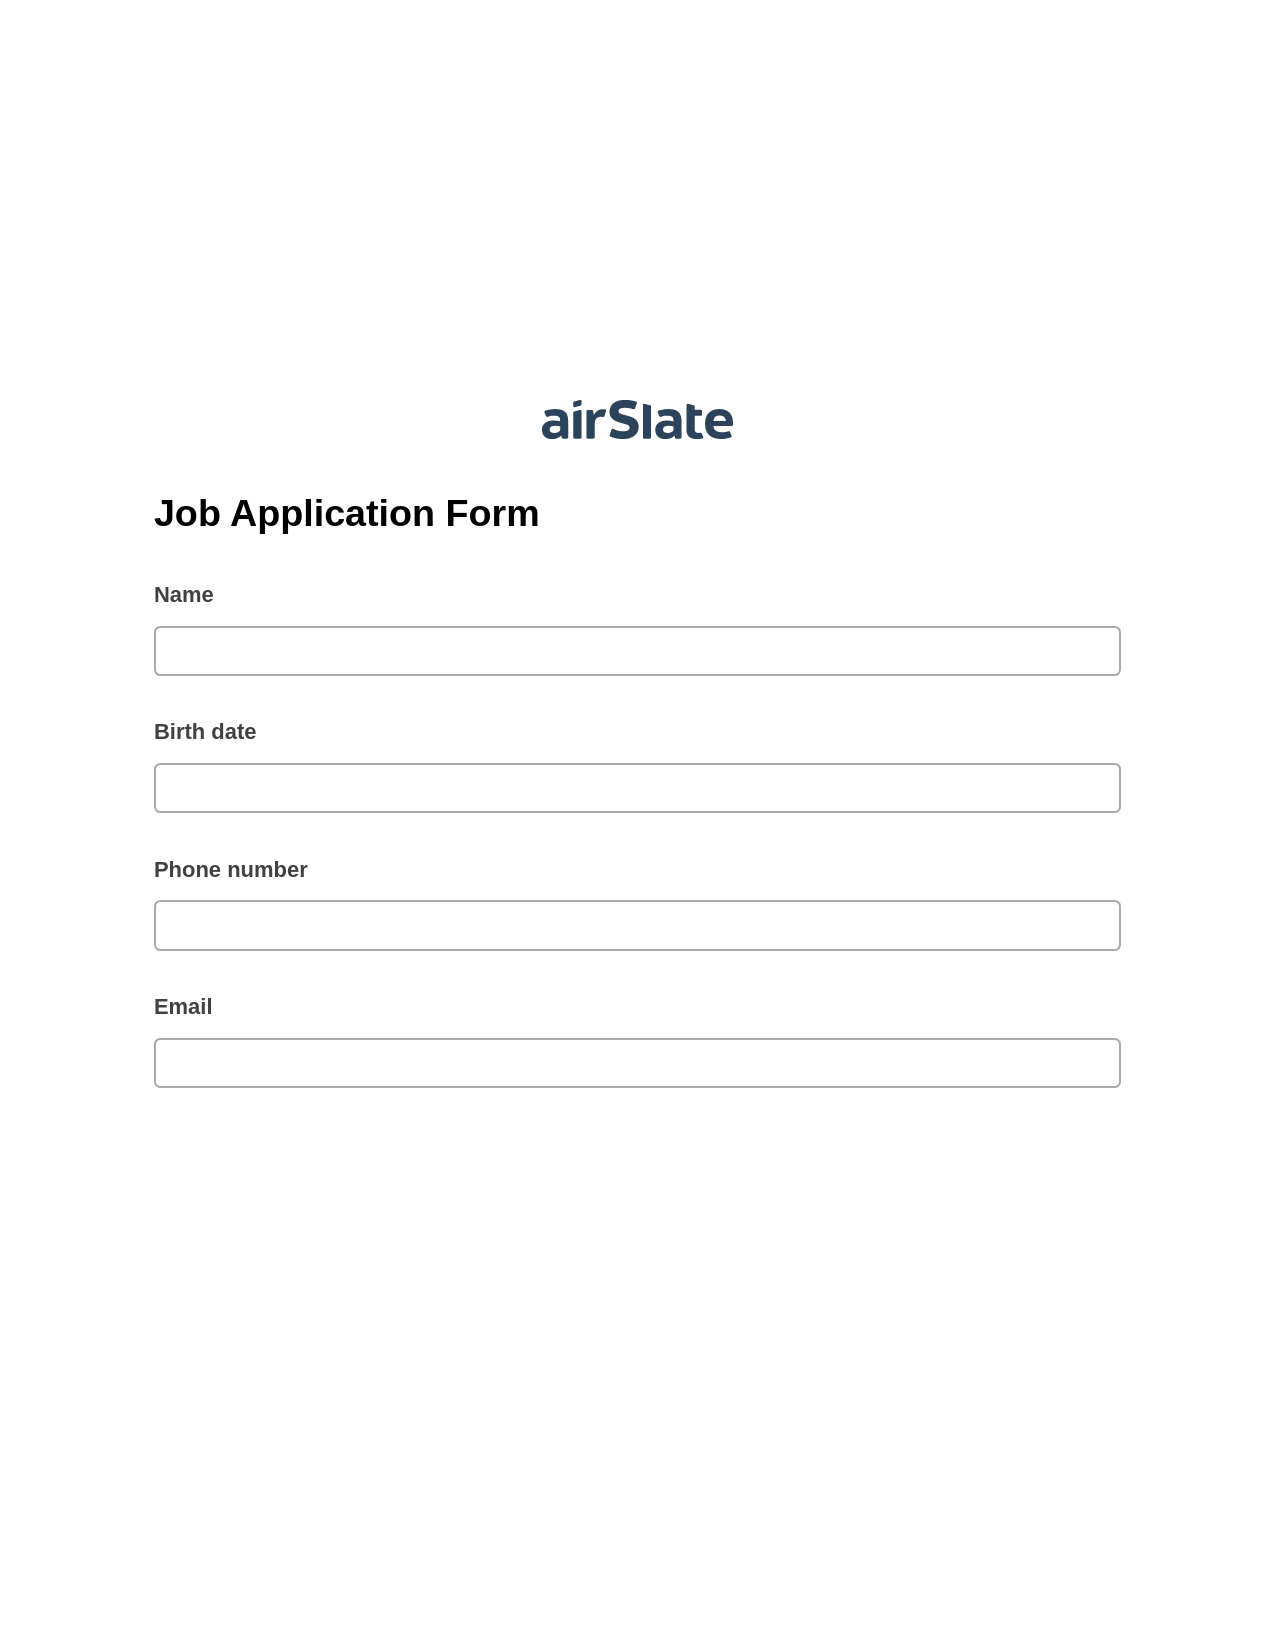 Job Application Form Pre-fill from Salesforce Record Bot, System Bot - Create a Slate in another Flow, Slack Two-Way Binding Bot